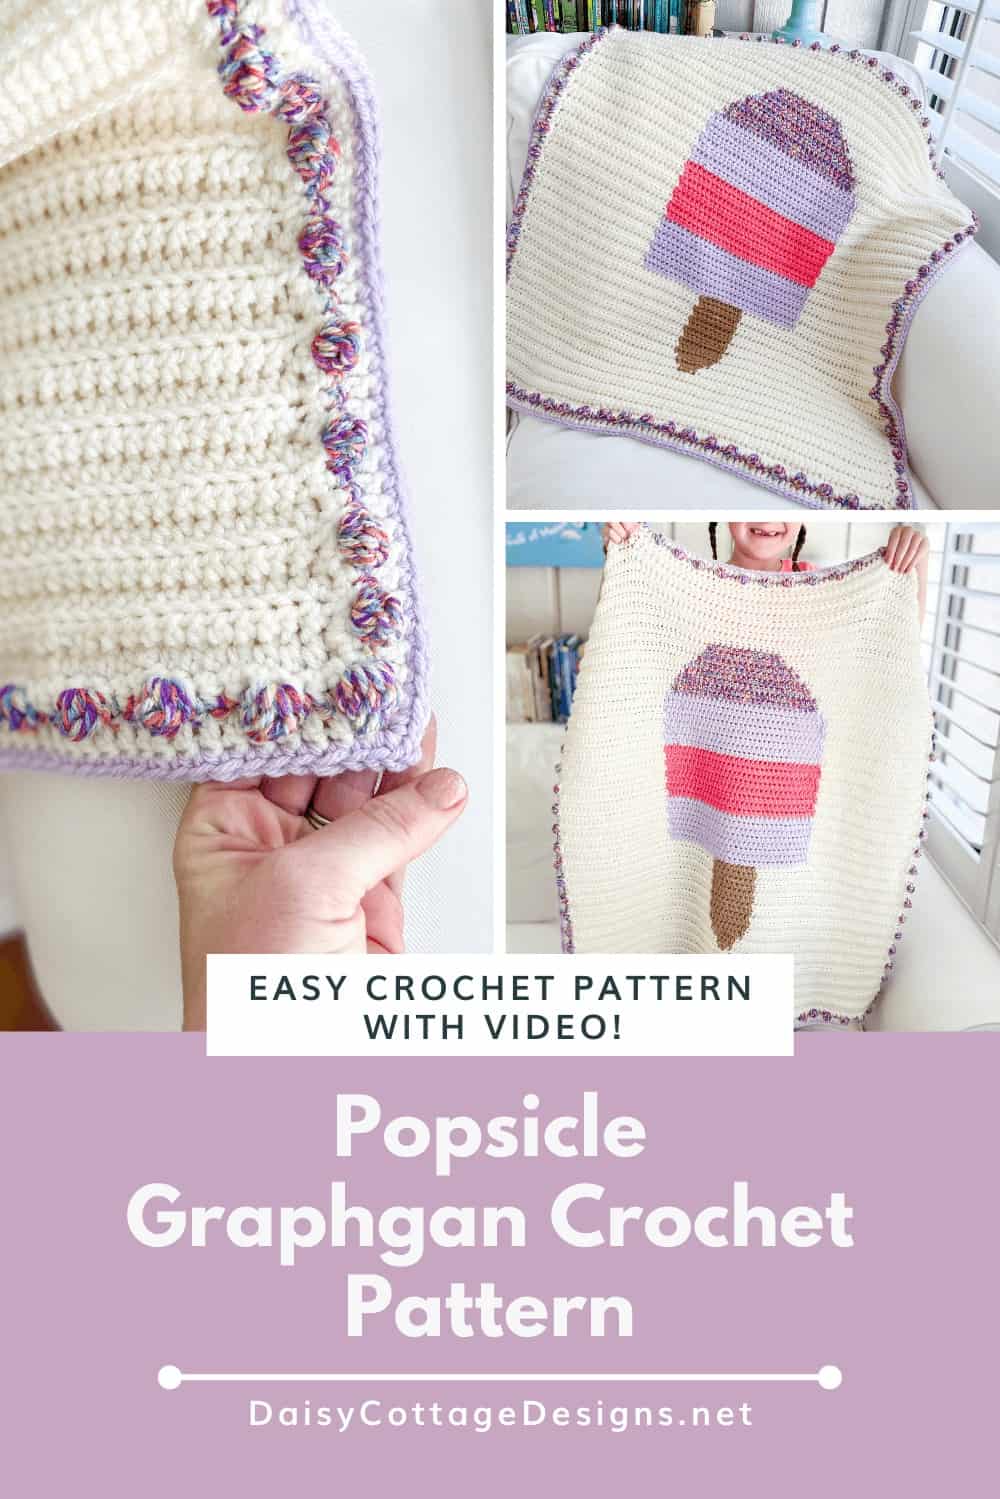 Use this popsicle graphgan crochet pattern to make a beautiful blanket! Written instructions and video make this an easy pattern to follow. 